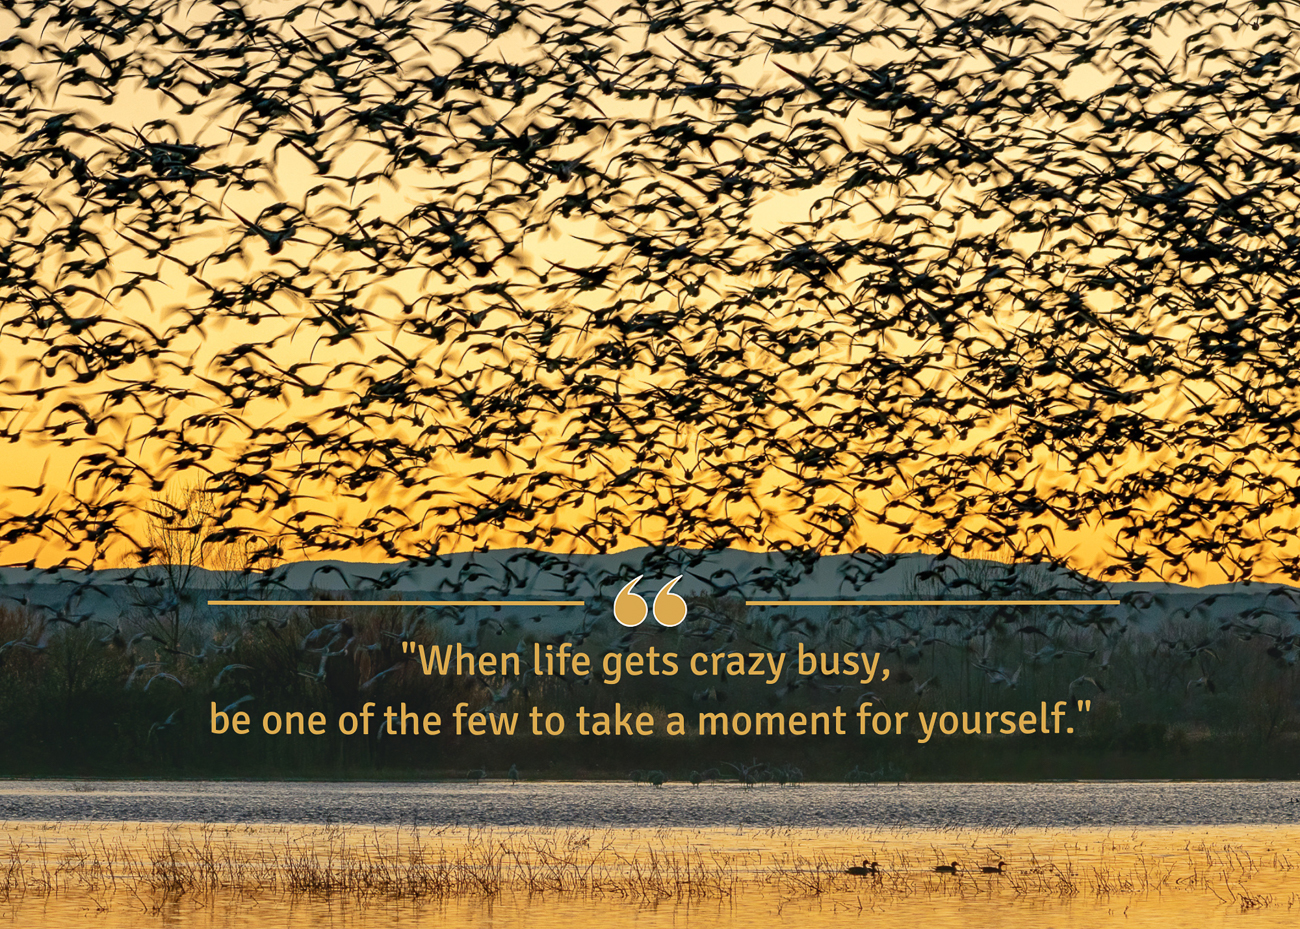 A busy photo of birds flying in a flock and a few resting plus a quote about taking time for yourself.